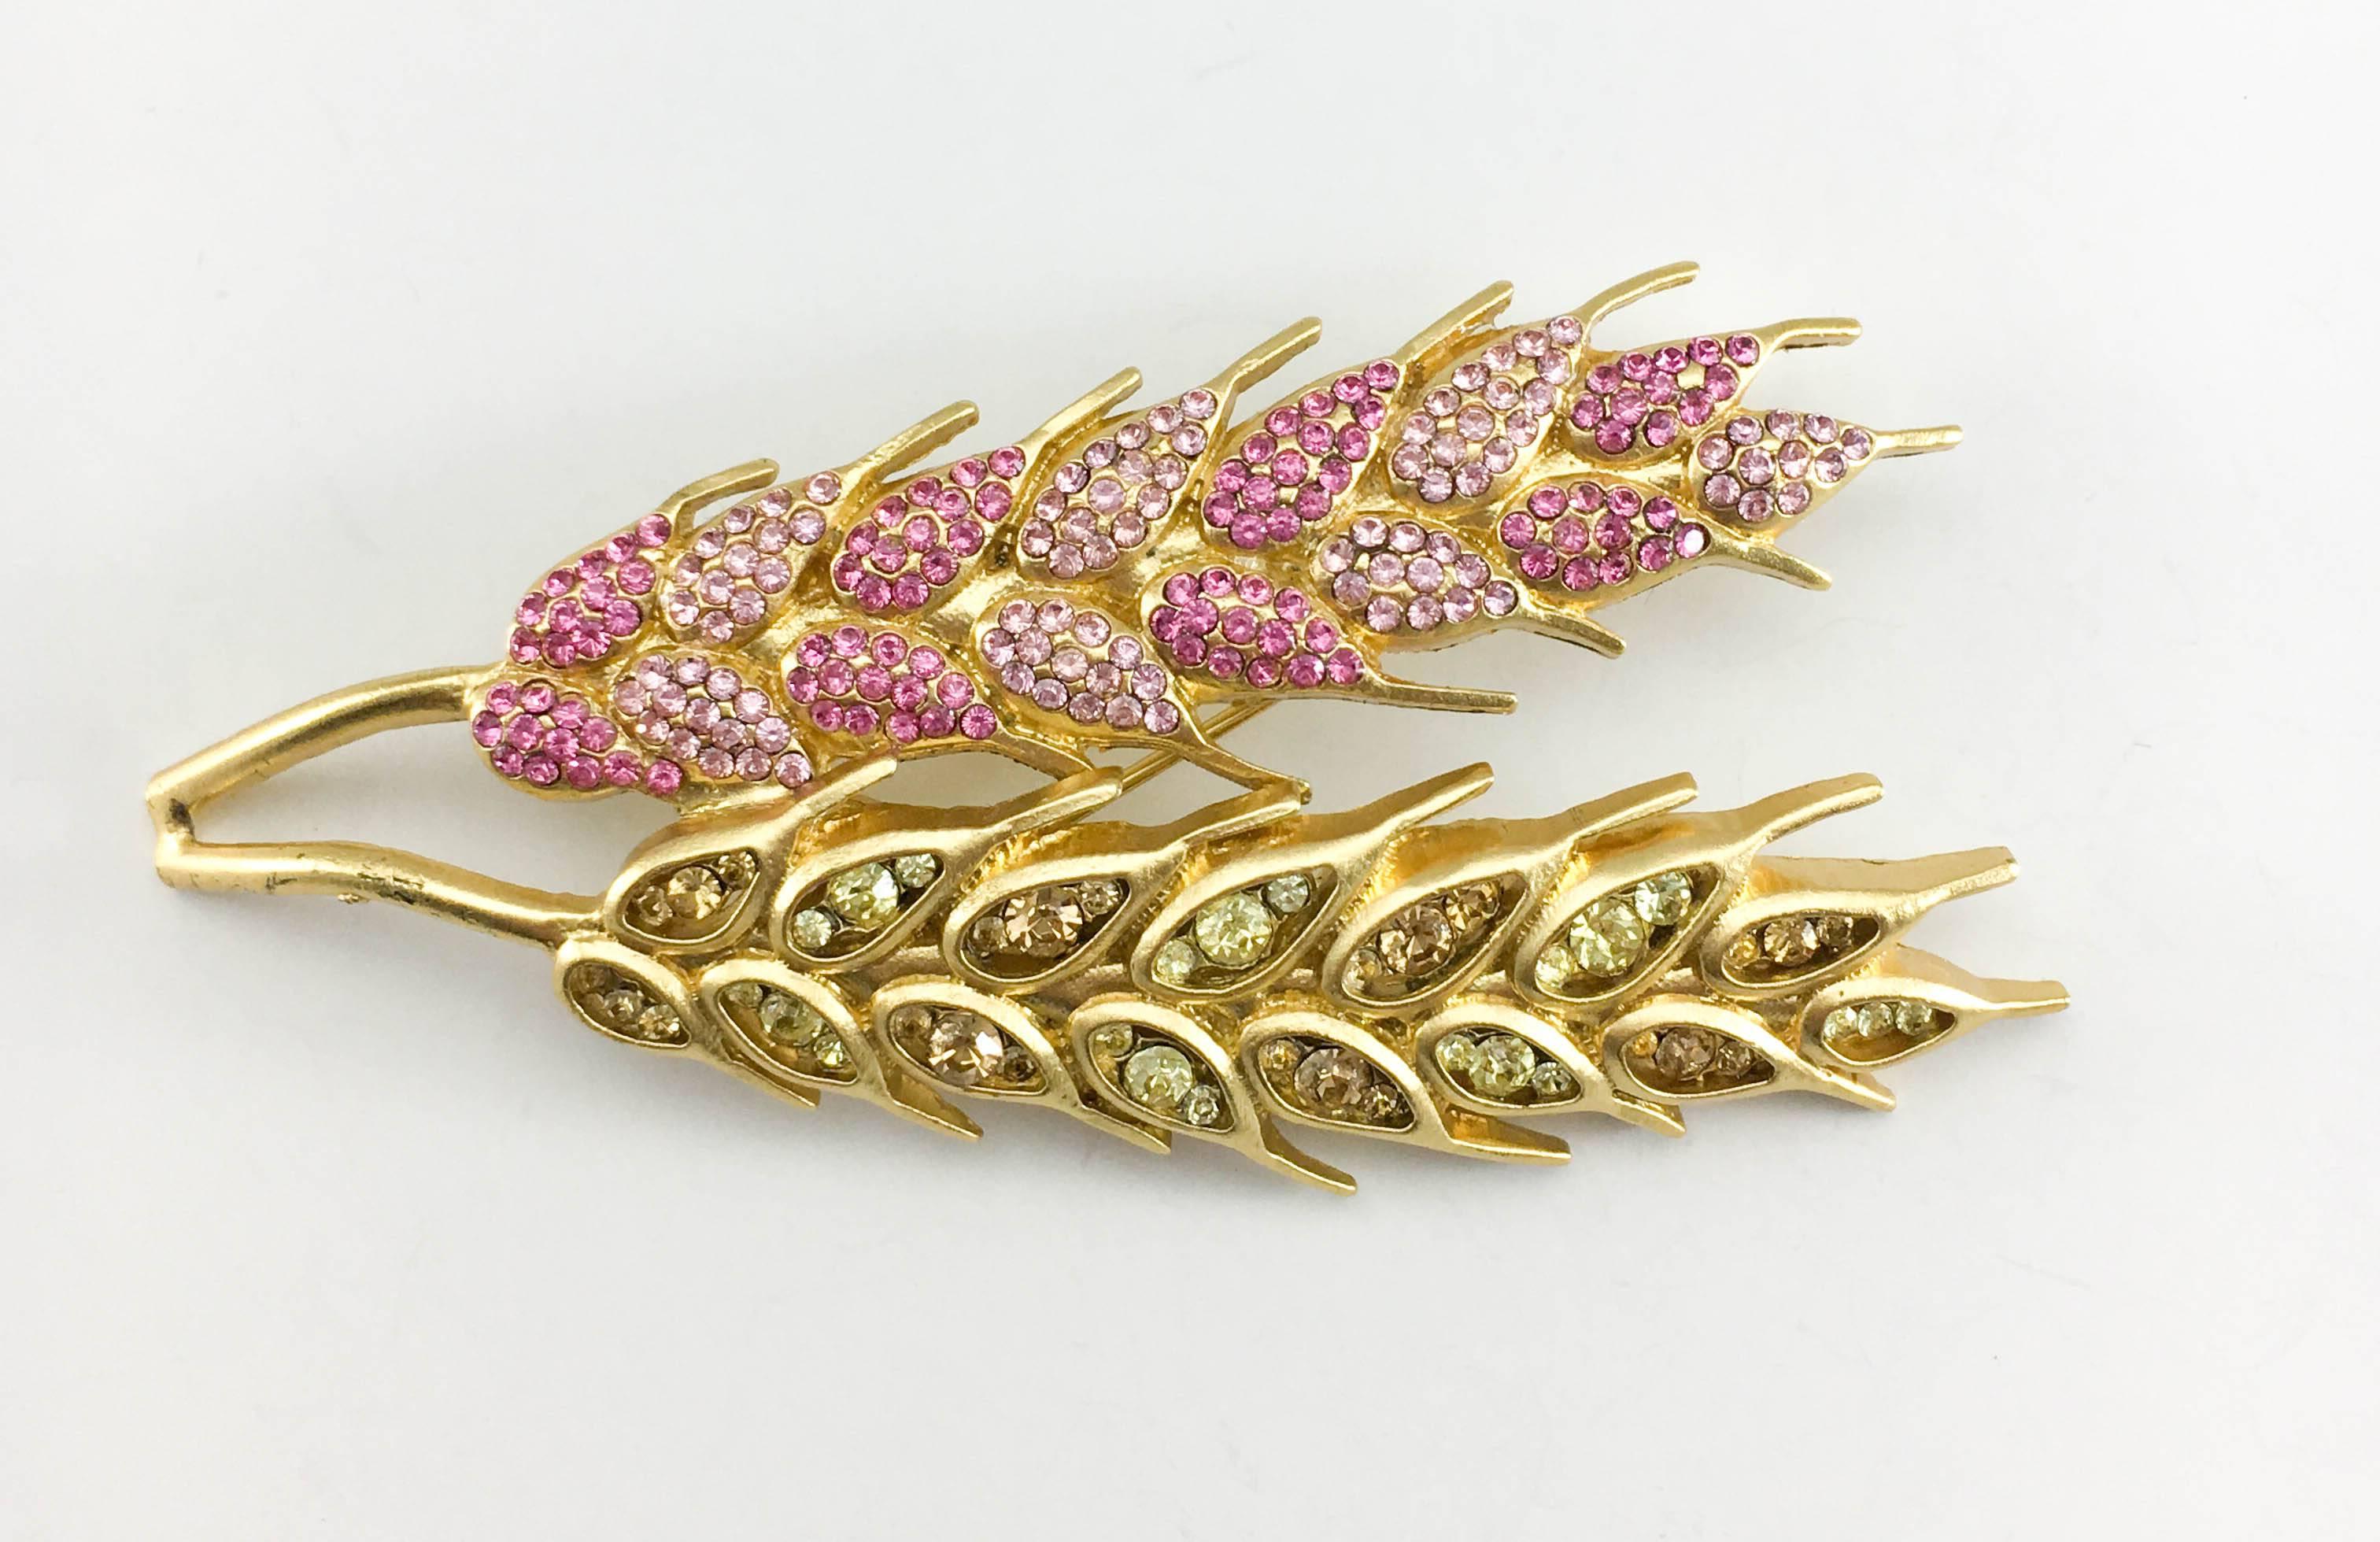 Vintage Chanel Wheat Sheaf Brooch. This beautiful brooch by Chanel was crafted for the 2003 Cruise Collection. Lagerfeld brought a whimsical touch with candy colours appearing throughout the collection. Gold-Plated, this pin brooch is shaped as a